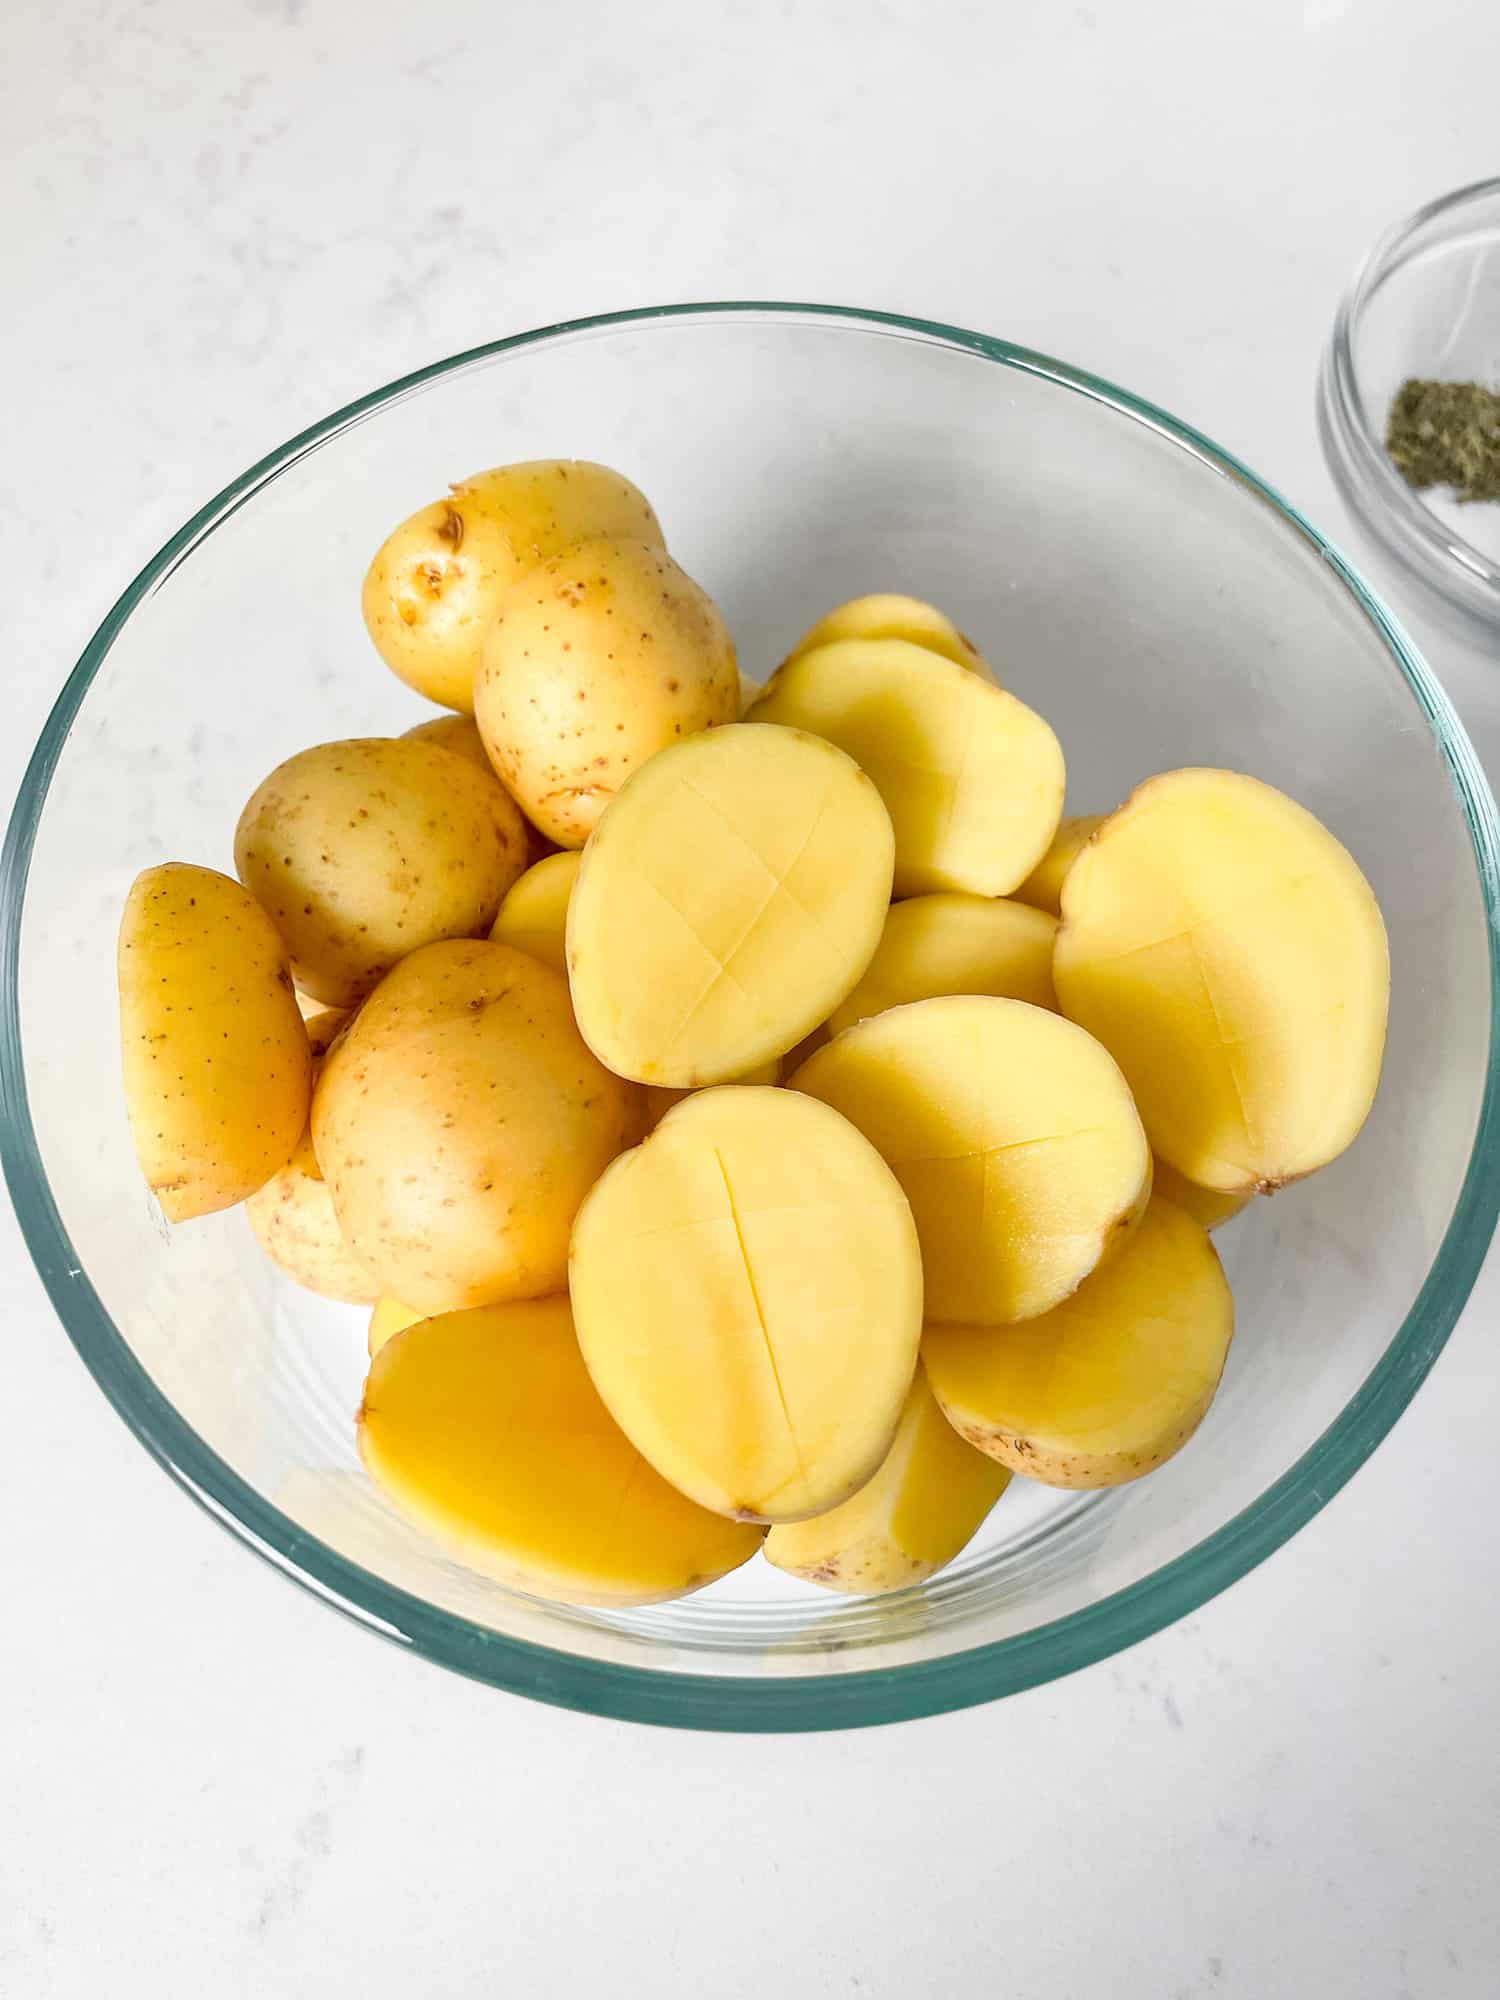 yukon gold potatoes cut in half and scored in a glass bowl